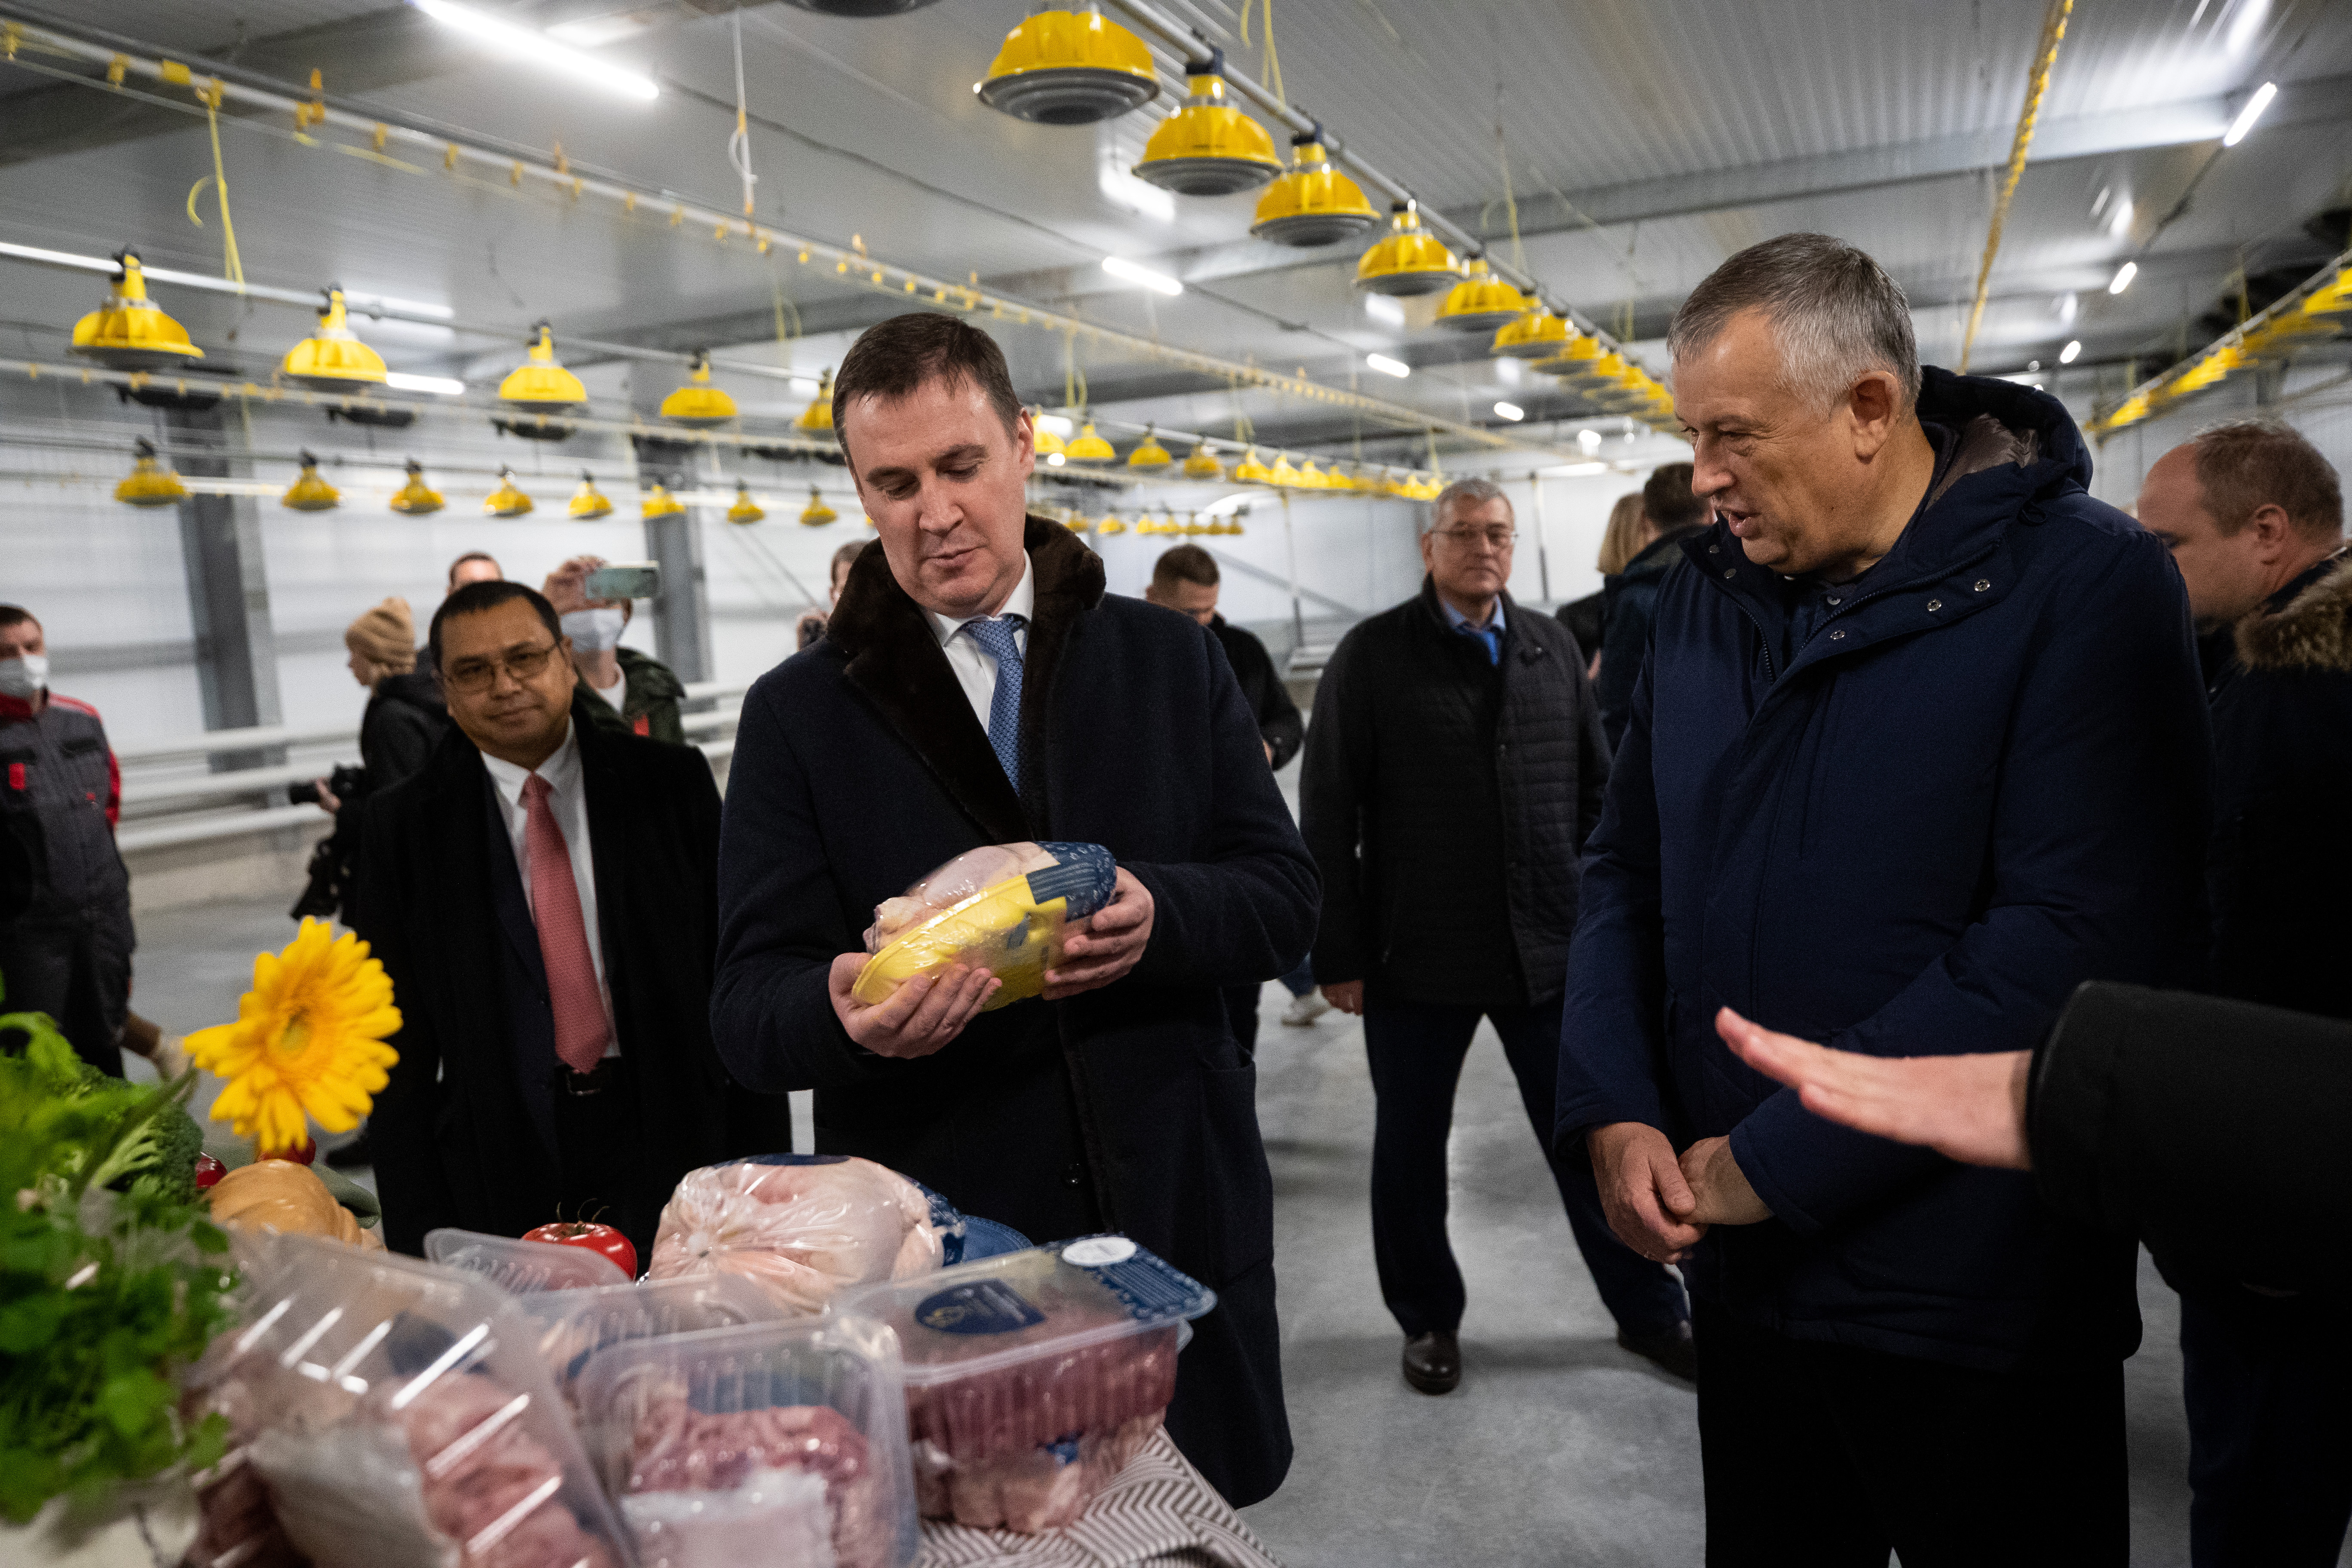 Russian Minister of Agriculture Dmitry Patrushev and the Governor of the Leningrad Region Alexander Drozdenko attended the opening of the Sevemaya poultry farm.